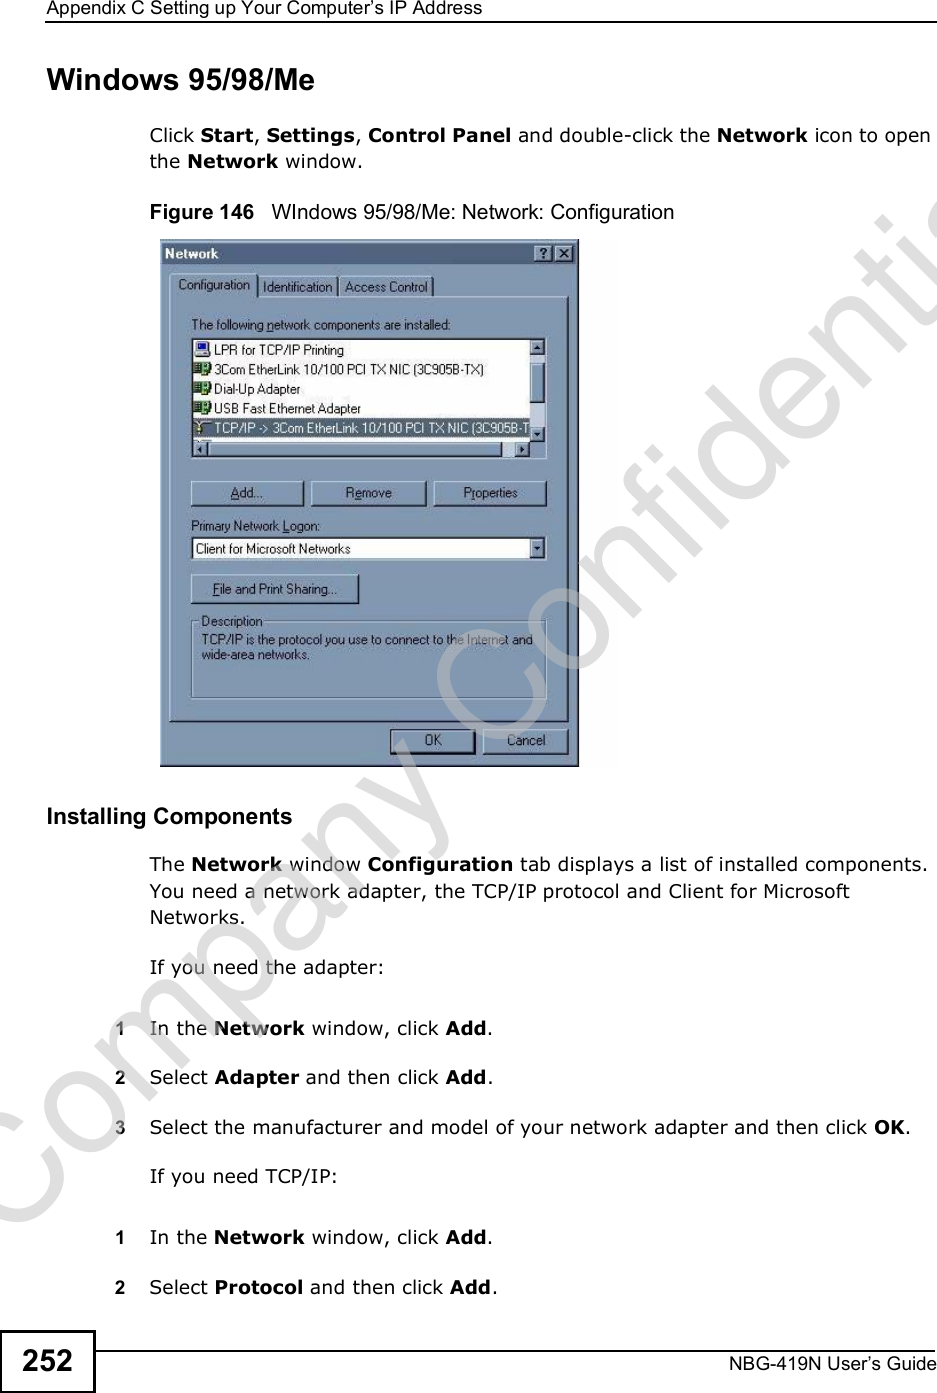 Appendix CSetting up Your Computer s IP AddressNBG-419N User s Guide252Windows 95/98/MeClick Start, Settings, Control Panel and double-click the Network icon to open the Network window.Figure 146   WIndows 95/98/Me: Network: ConfigurationInstalling ComponentsThe Network window Configuration tab displays a list of installed components. You need a network adapter, the TCP/IP protocol and Client for Microsoft Networks.If you need the adapter:1In the Network window, click Add.2Select Adapter and then click Add.3Select the manufacturer and model of your network adapter and then click OK.If you need TCP/IP:1In the Network window, click Add.2Select Protocol and then click Add.Company Confidential